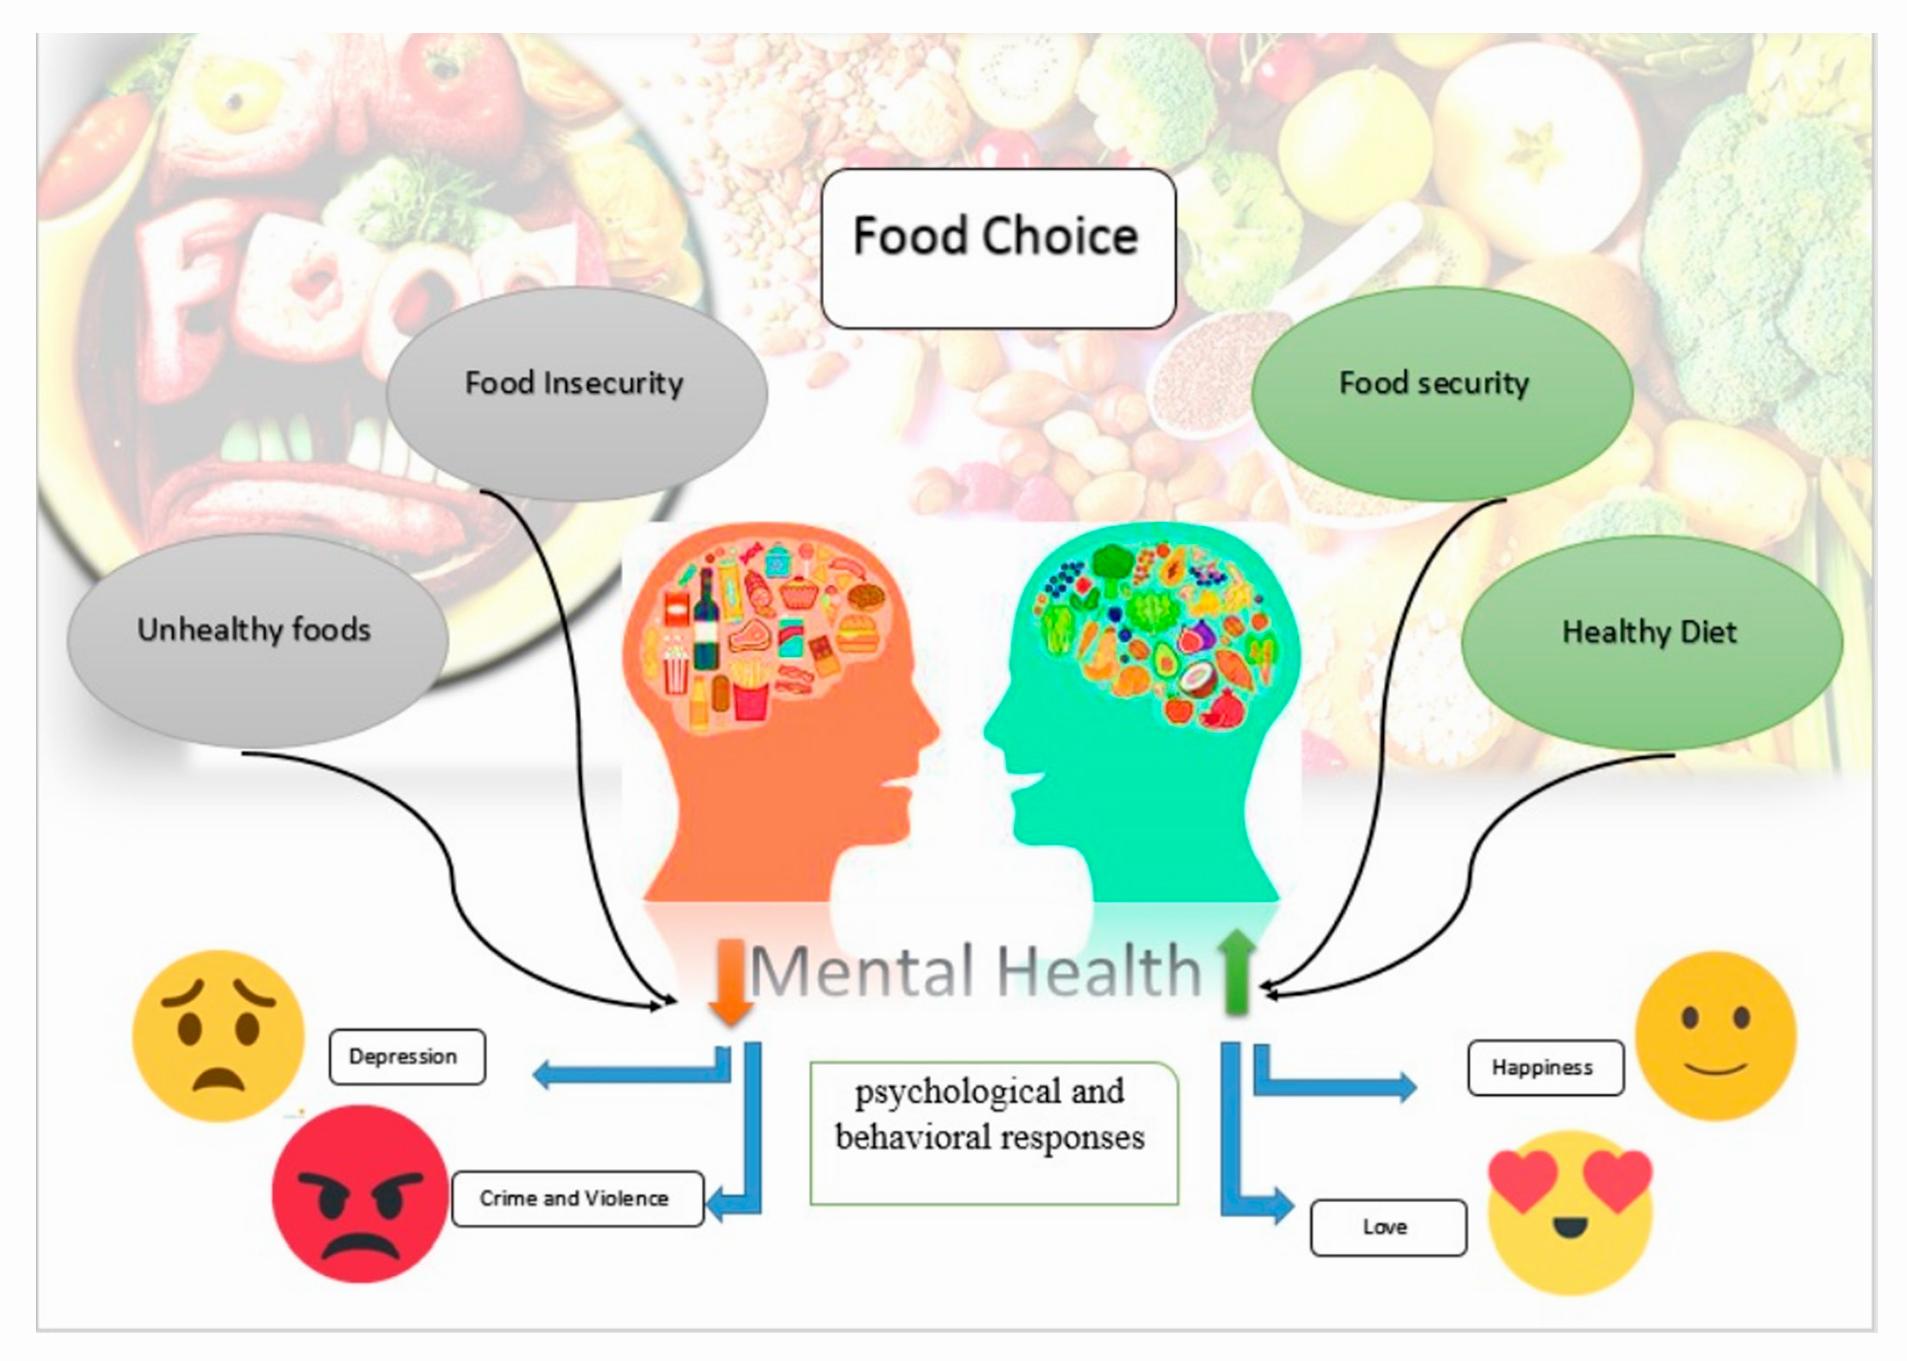 A graphic showing the relationship between food choice, mental health, and food security.